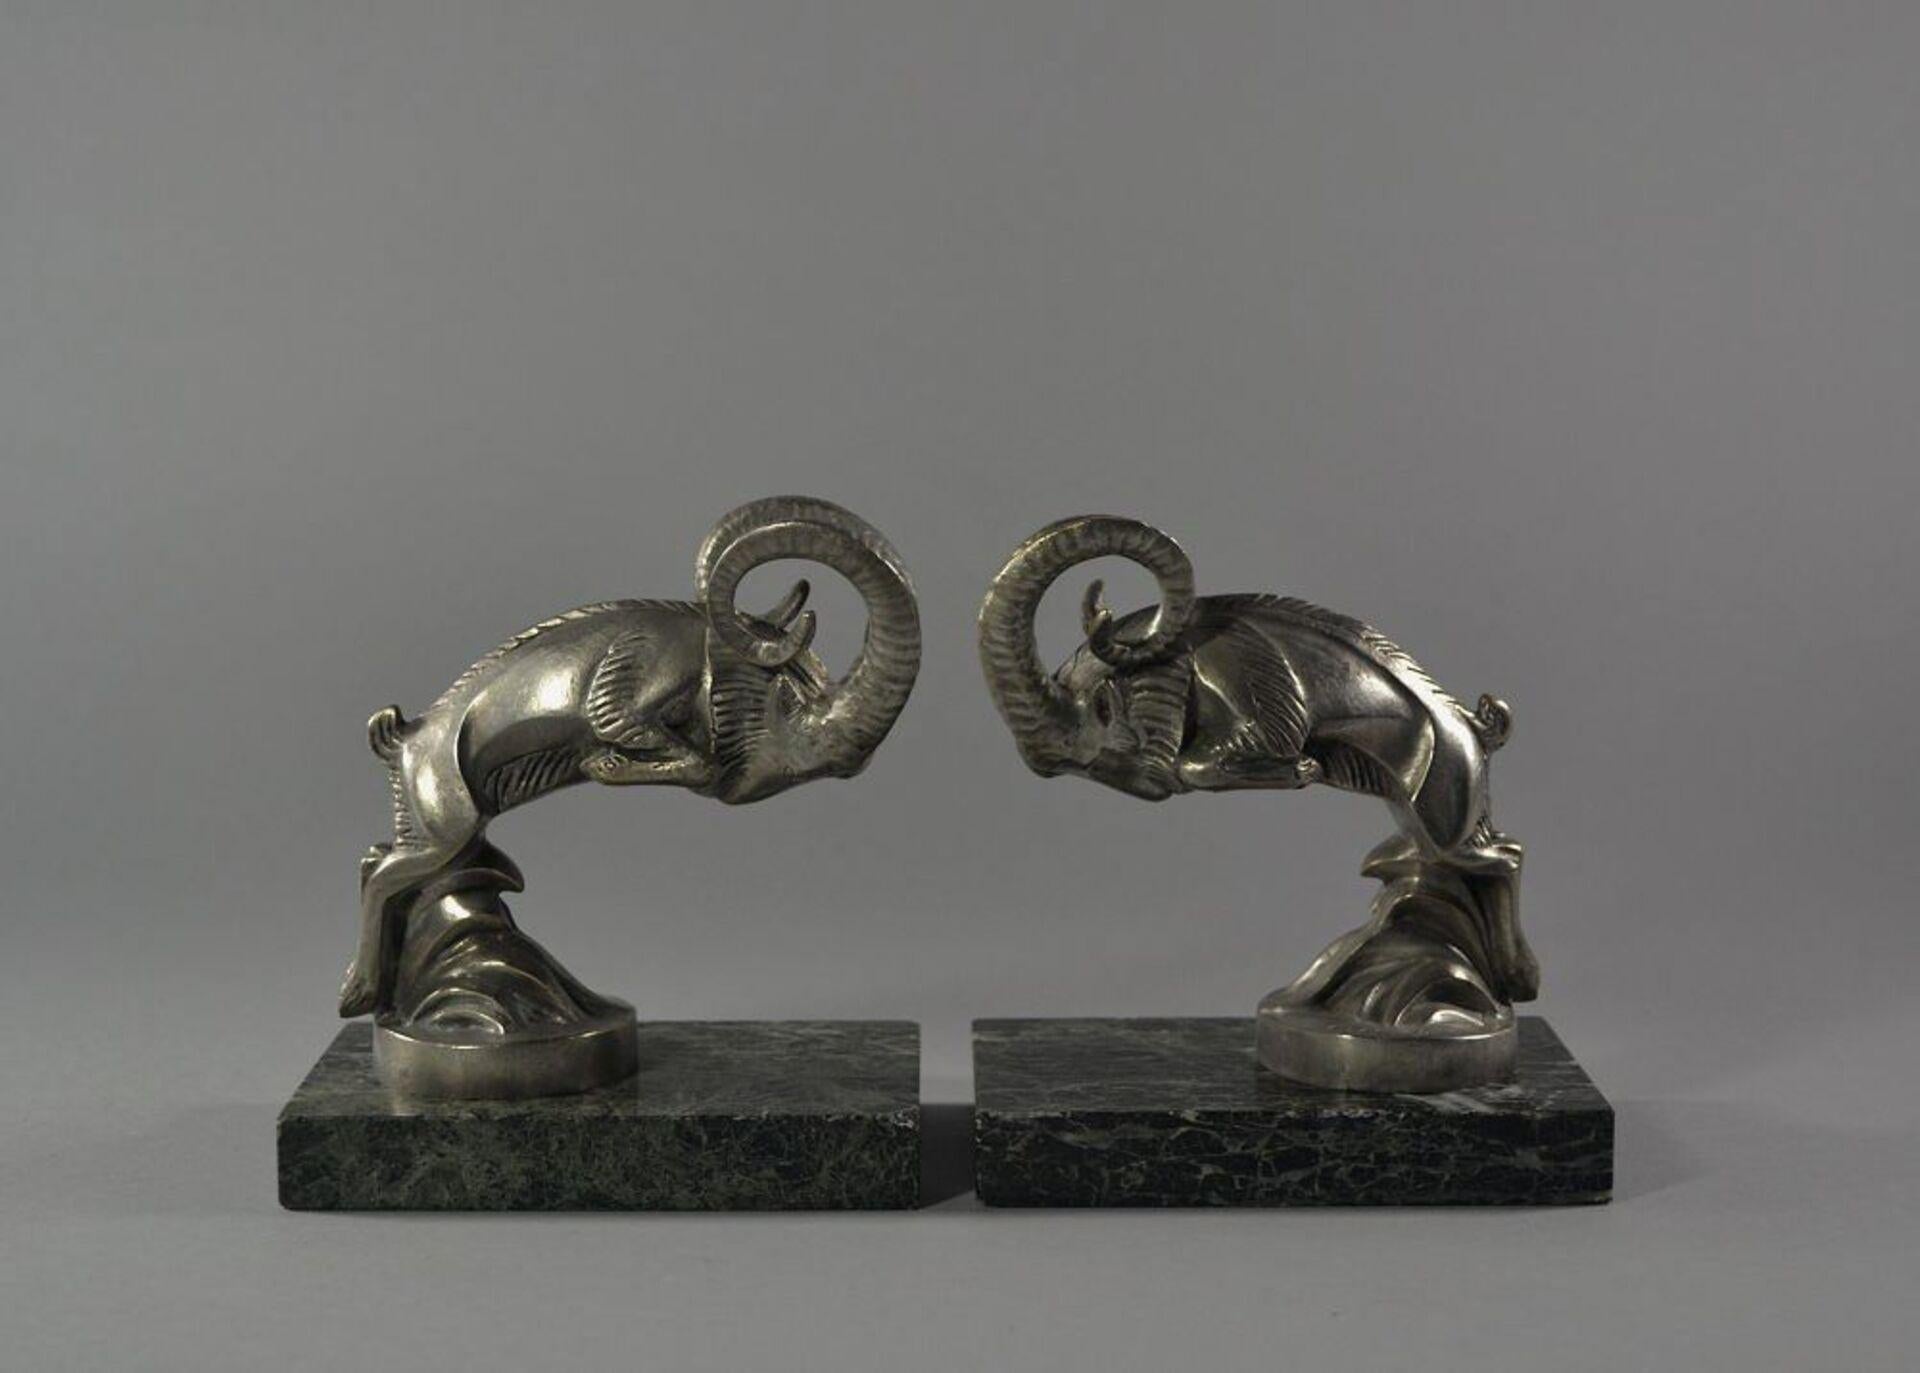 C. Laplagne car mascots

A pair of bookends with mountain goats. This figure was used in the 1920's as car mascot.
One figure signed and with Susse Paris Foundry mark.
Nickel or silver plated bronze. Excellent condition.
Each bookend L13cm l.